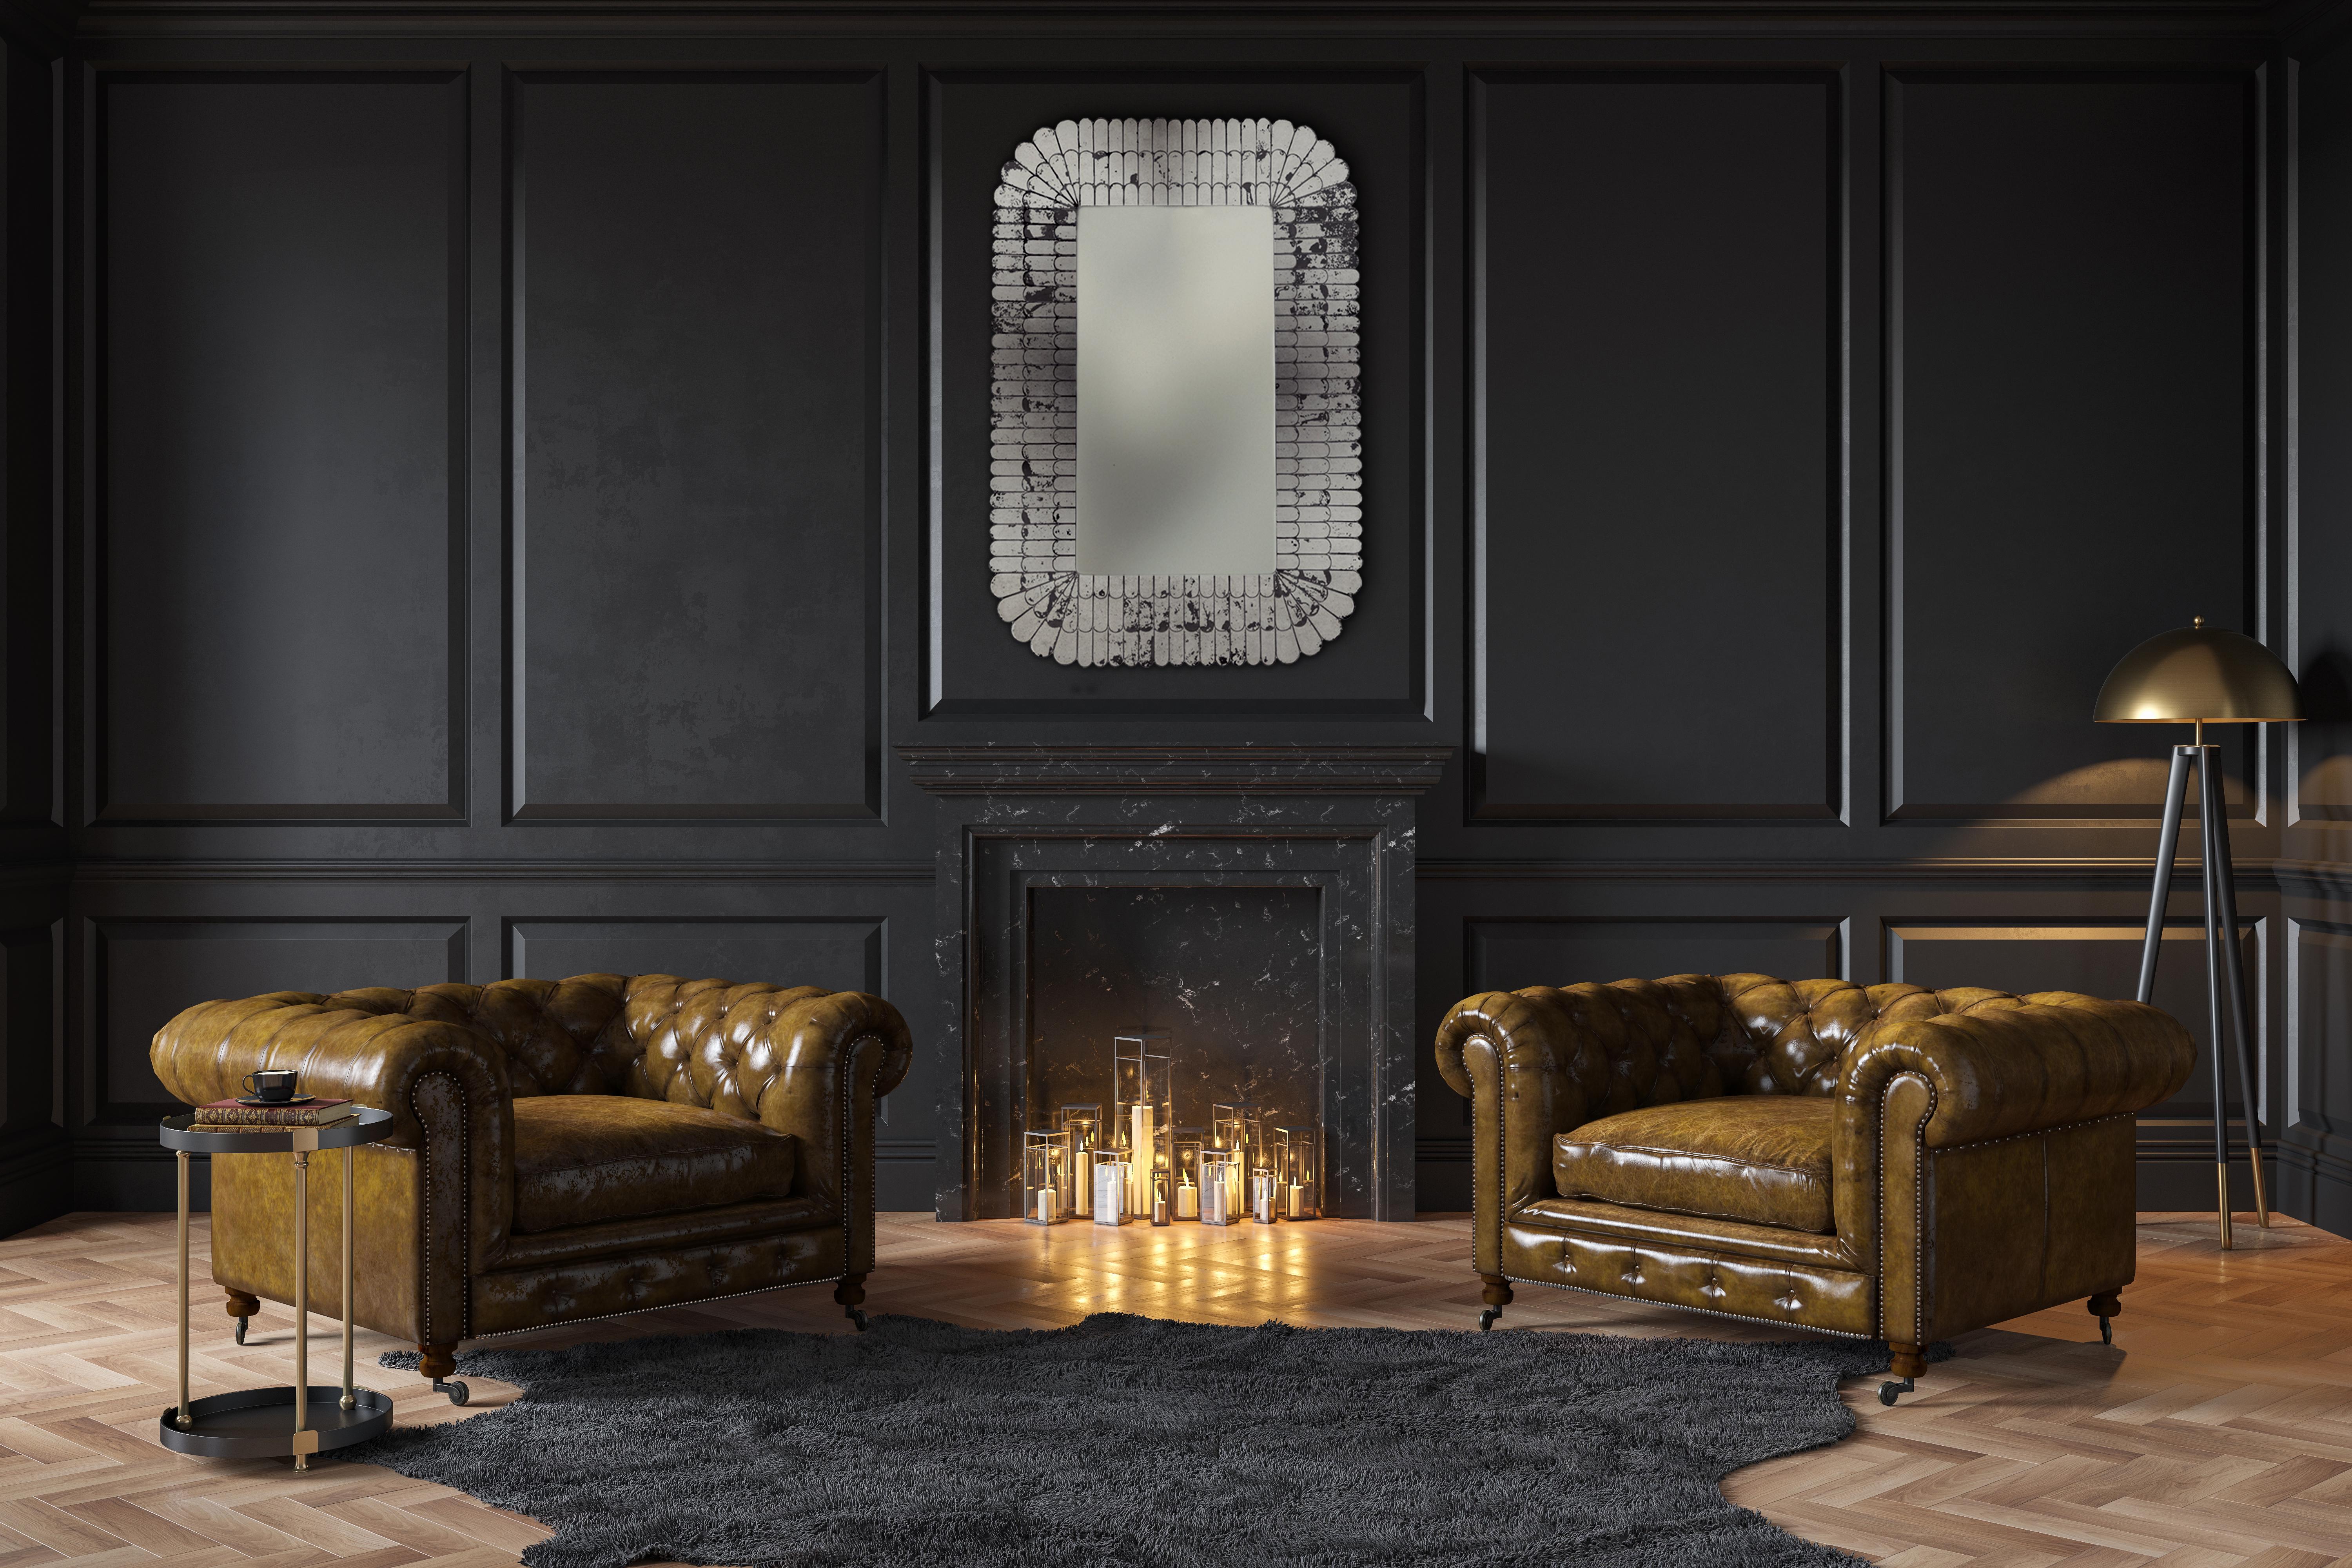 The right wall mirror can complete your interior. This Venetian modern mirror is the the perfect addition to both classic and contemporary spaces.
Sizes and colors are variable.

